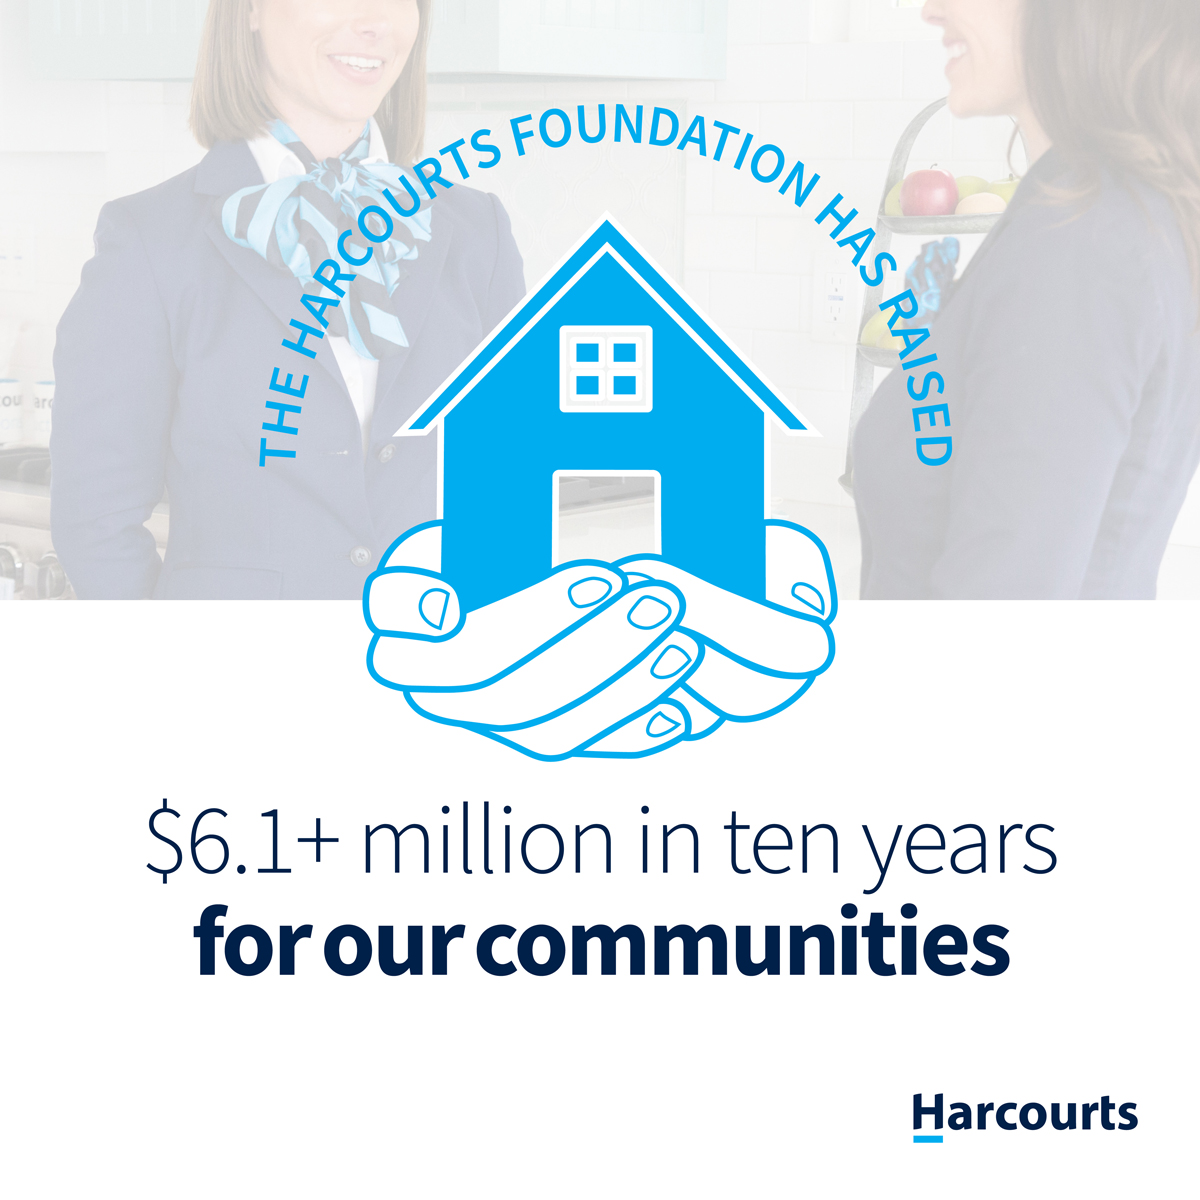 The Harcourts Foundation has raised over 6.1 Million dollars in ten years for our communities.